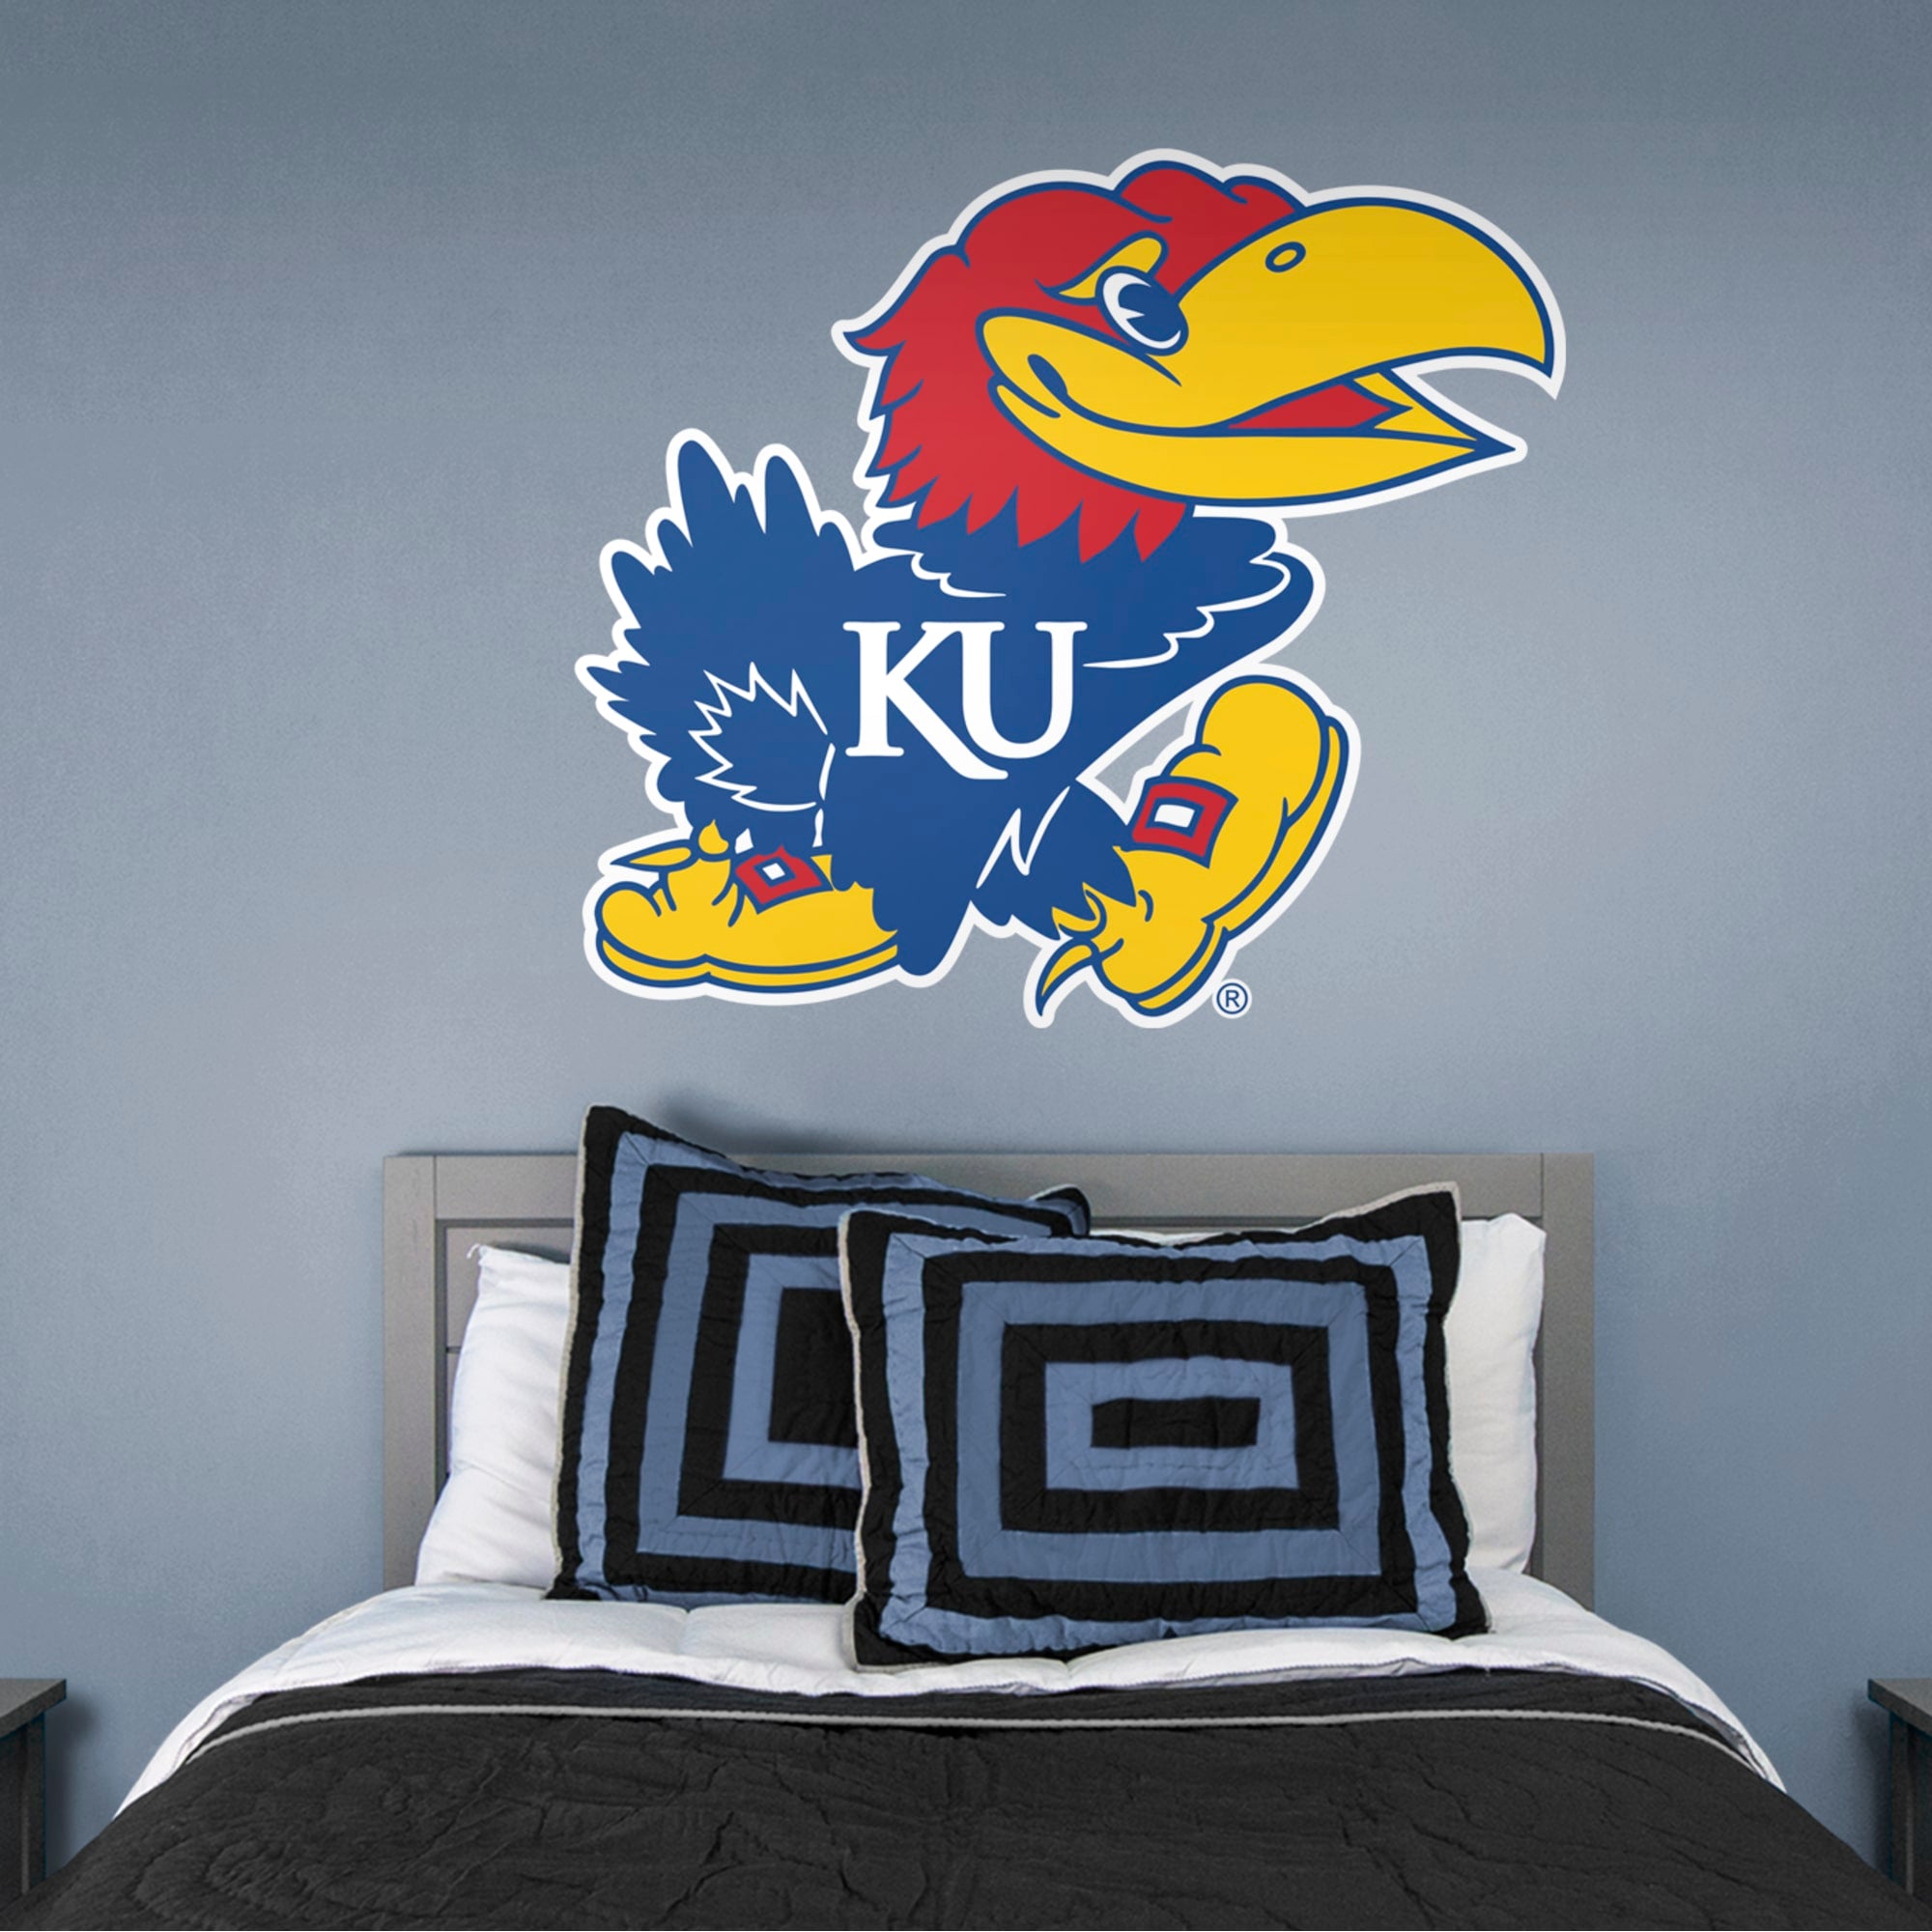 Kansas Jayhawks: Logo - Officially Licensed Removable Wall Decal 43.0"W x 39.0"H by Fathead | Vinyl